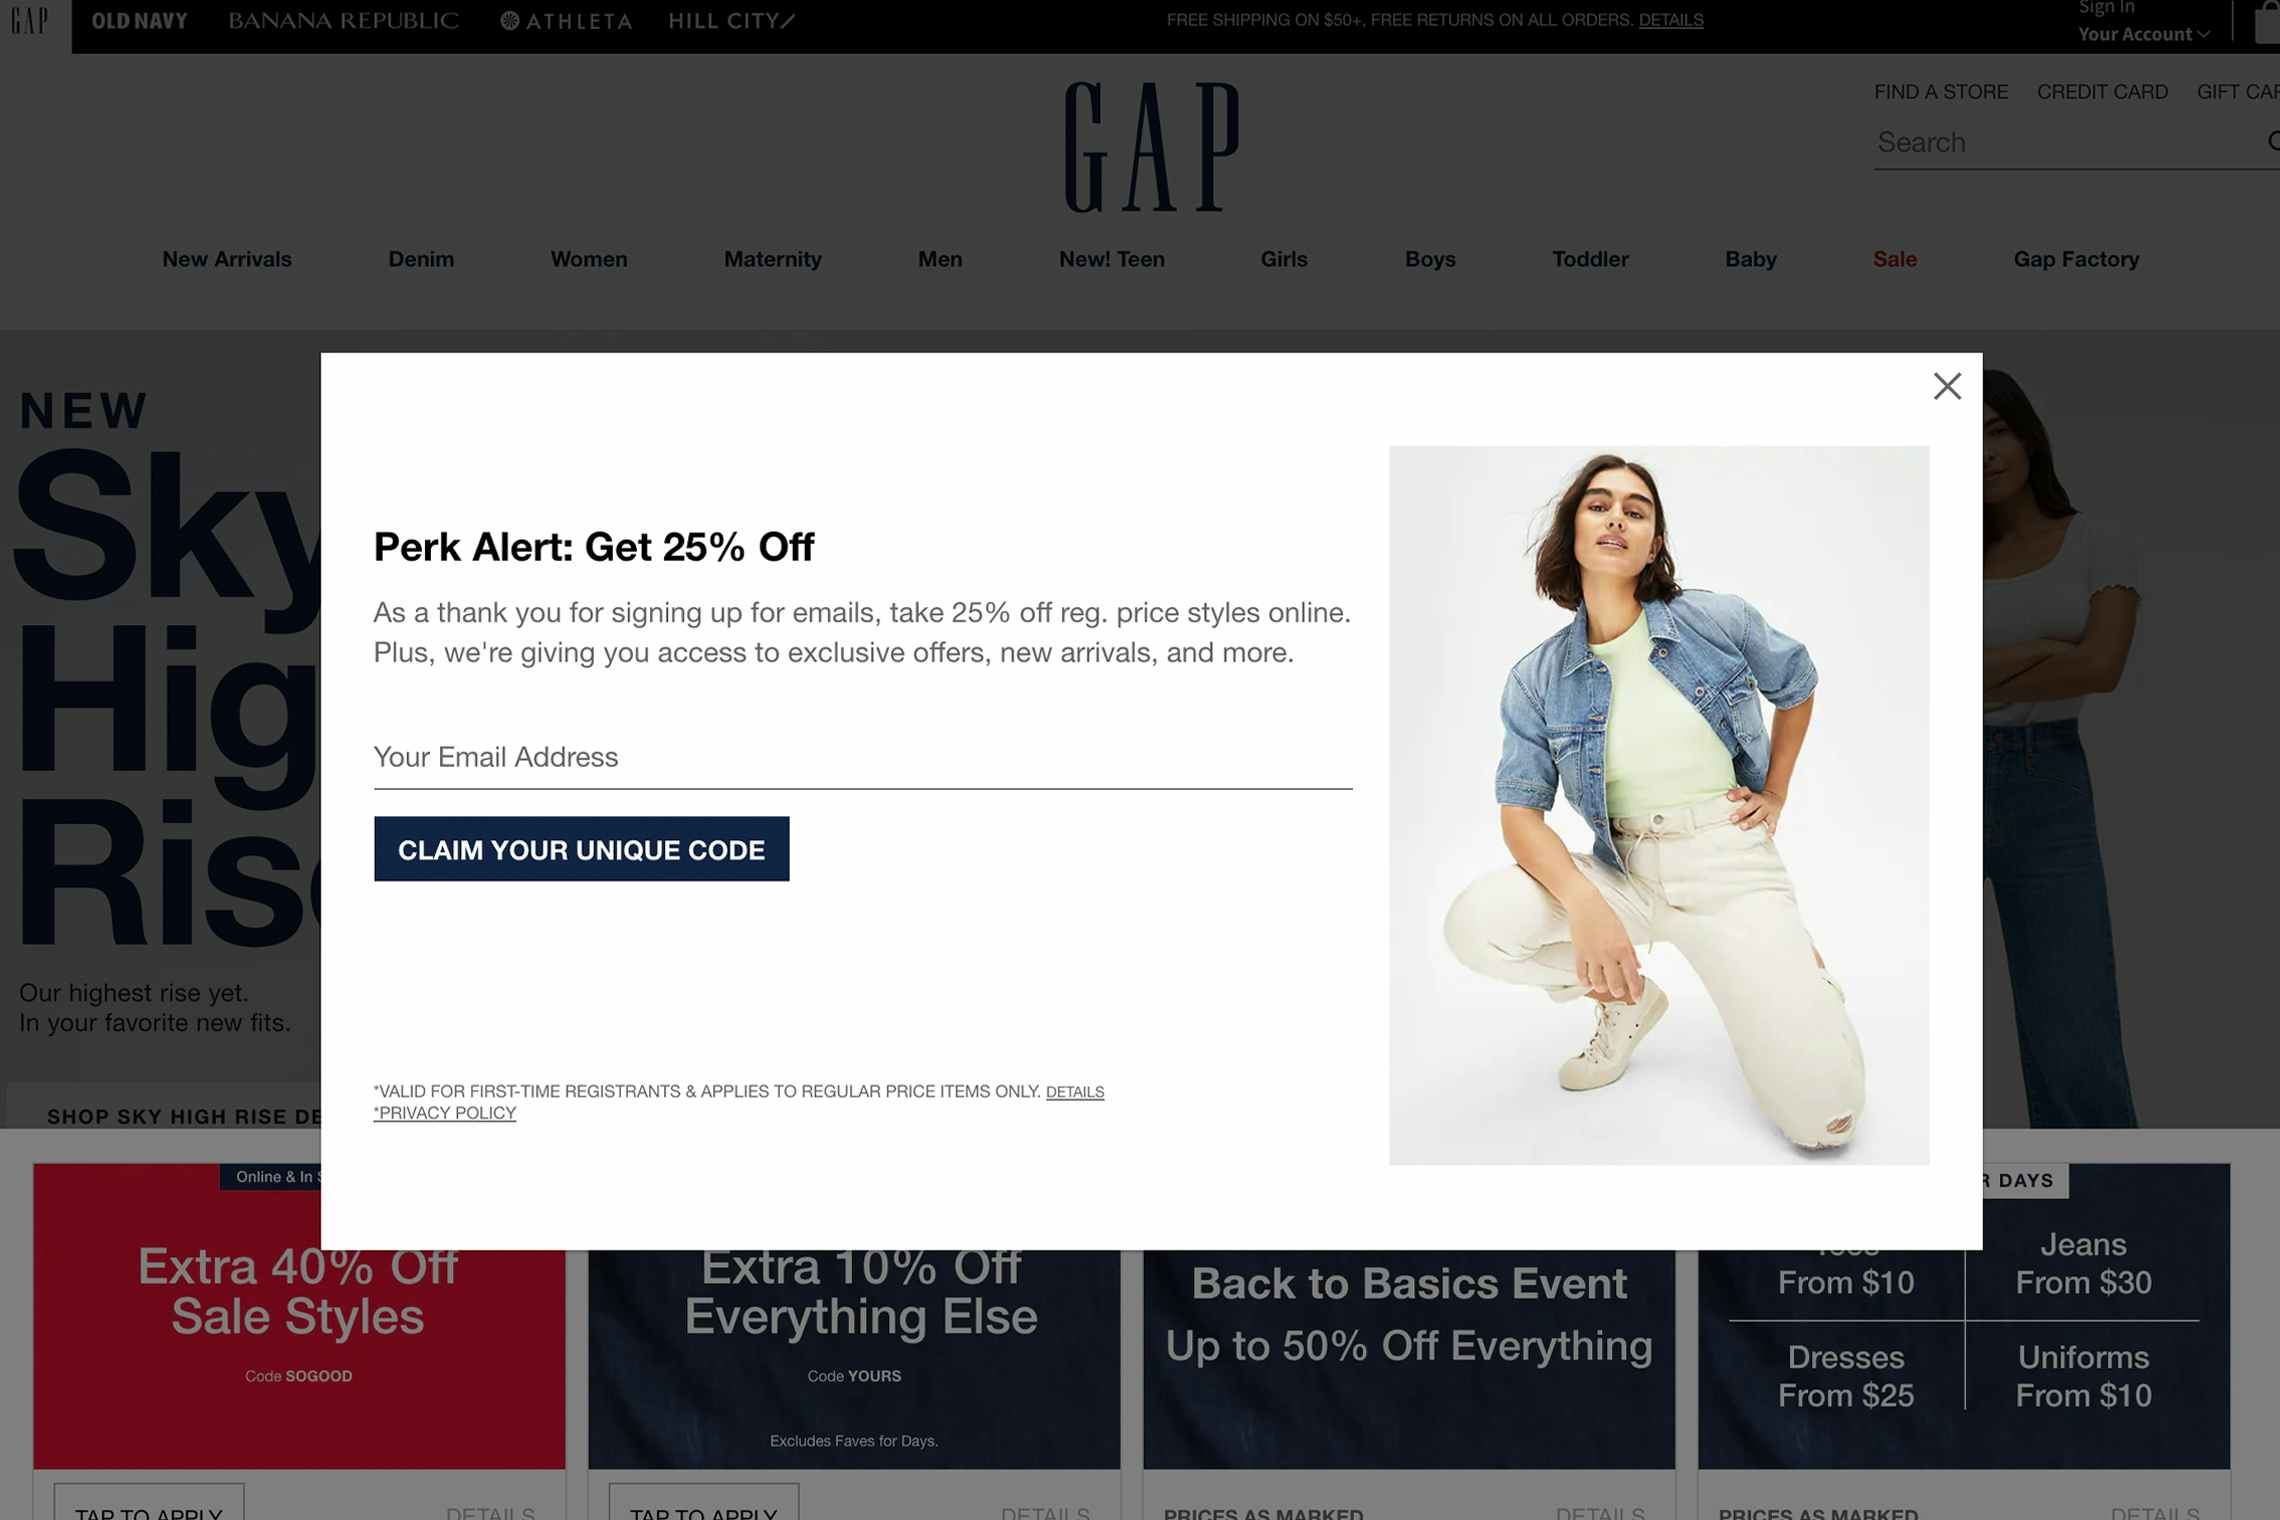 Hack the Gap Sale Schedule With These 20 Tips - The Krazy Coupon Lady